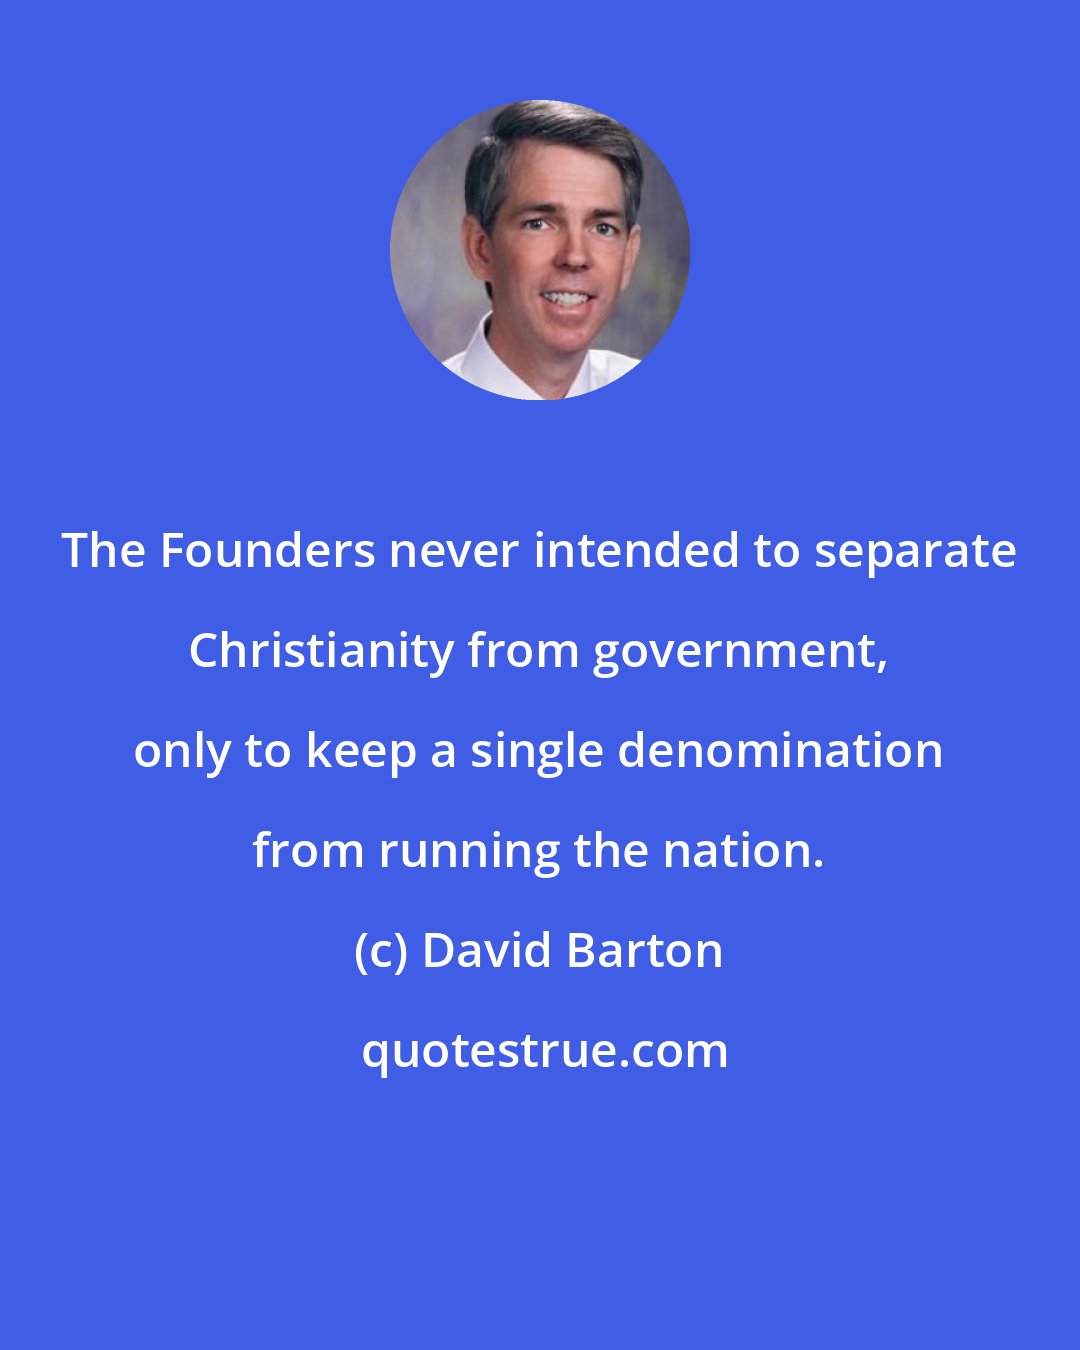 David Barton: The Founders never intended to separate Christianity from government, only to keep a single denomination from running the nation.